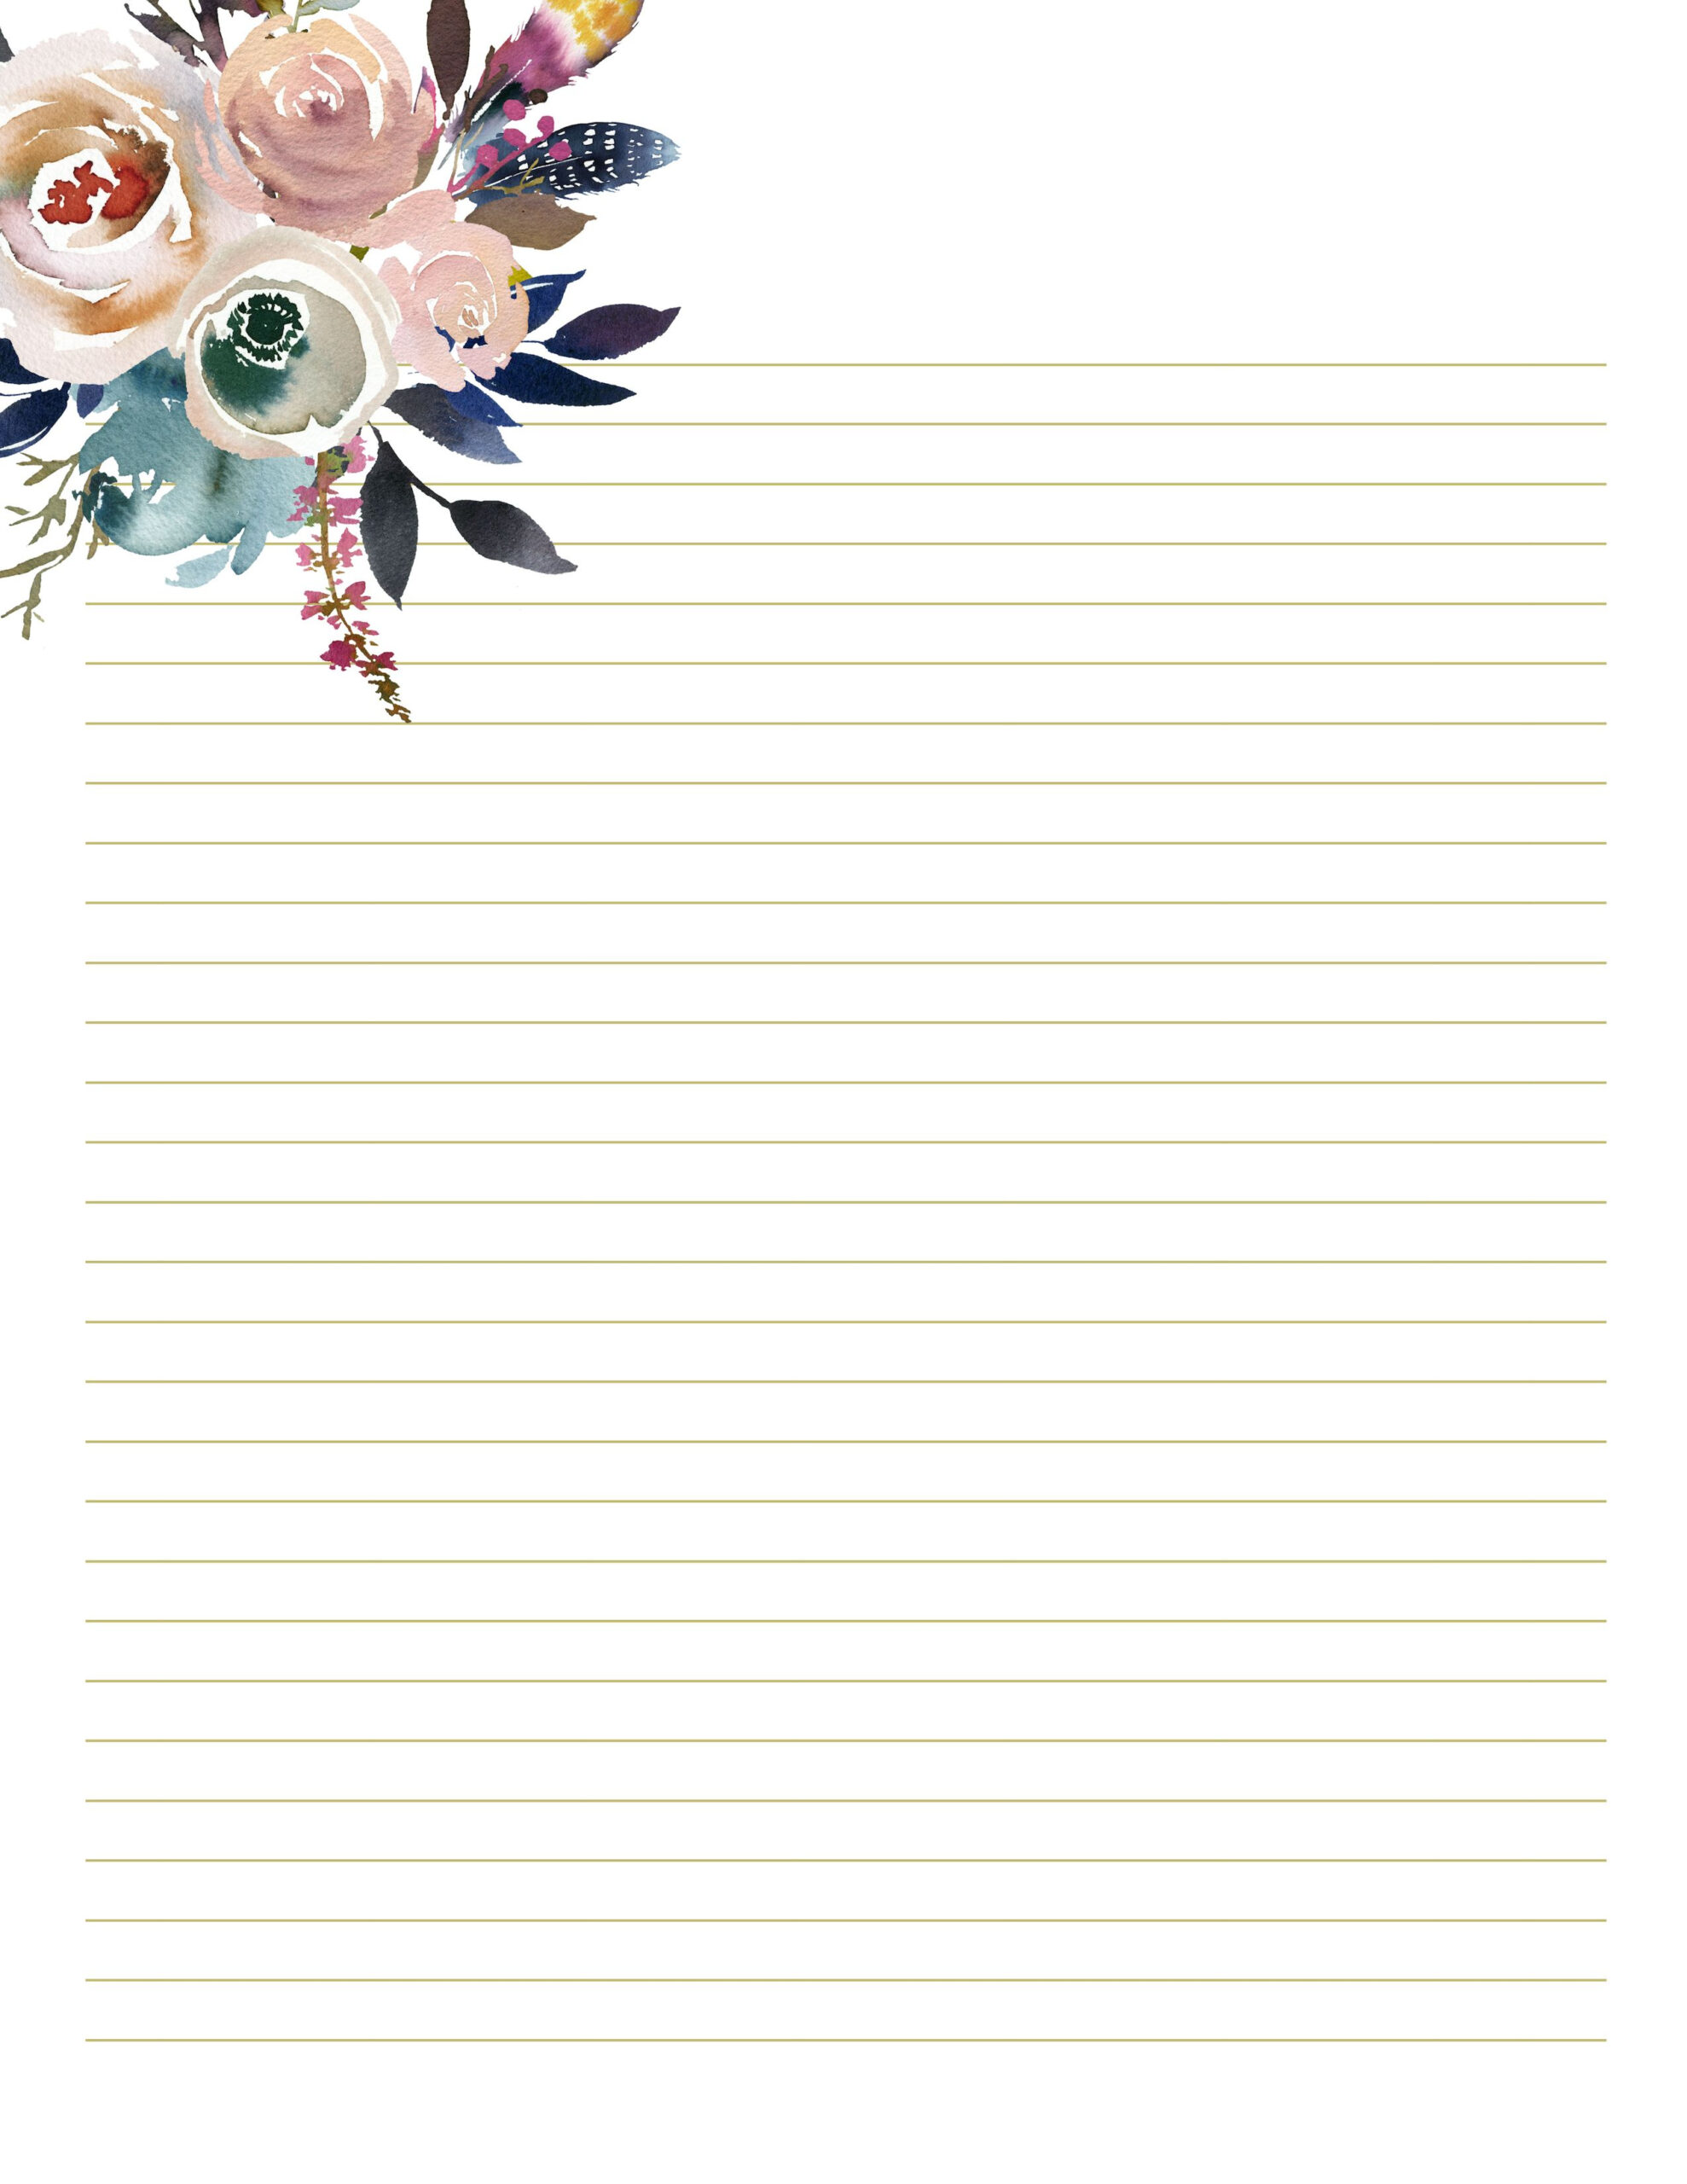 Lined Stationery Paper For Letter Writing